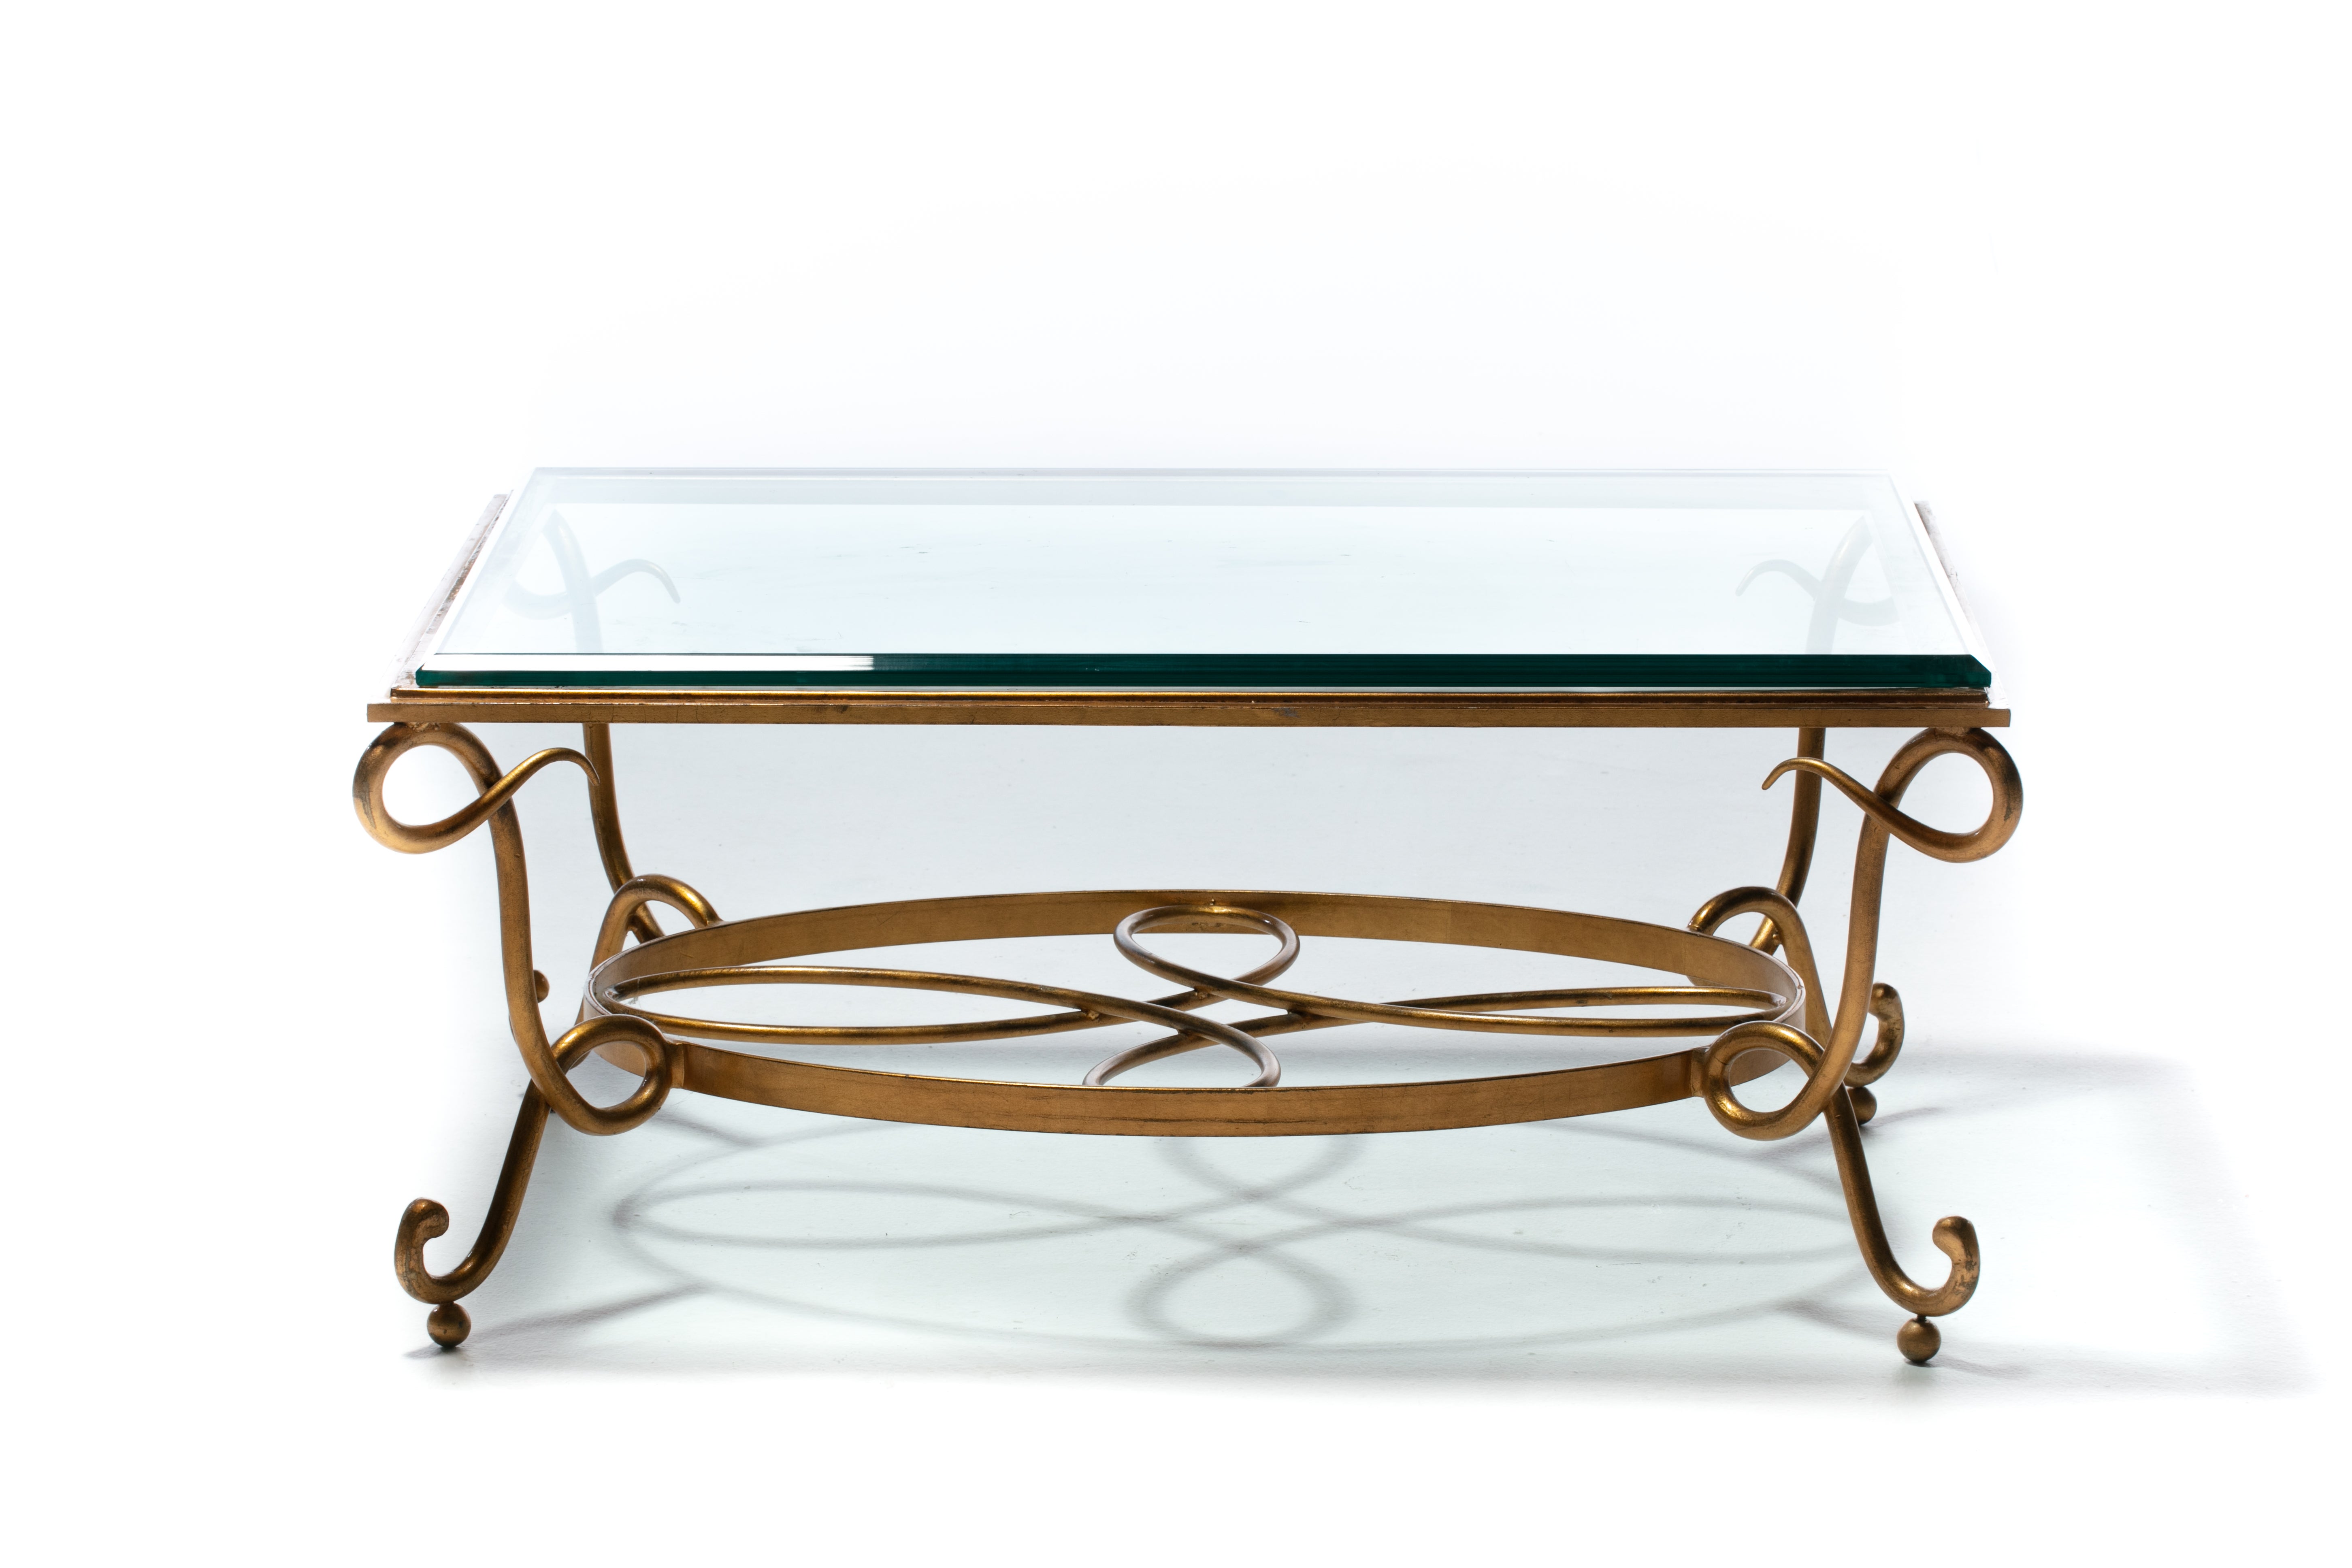 French 1940s René Prou Style Gilt Iron Coffee Table For Sale 6